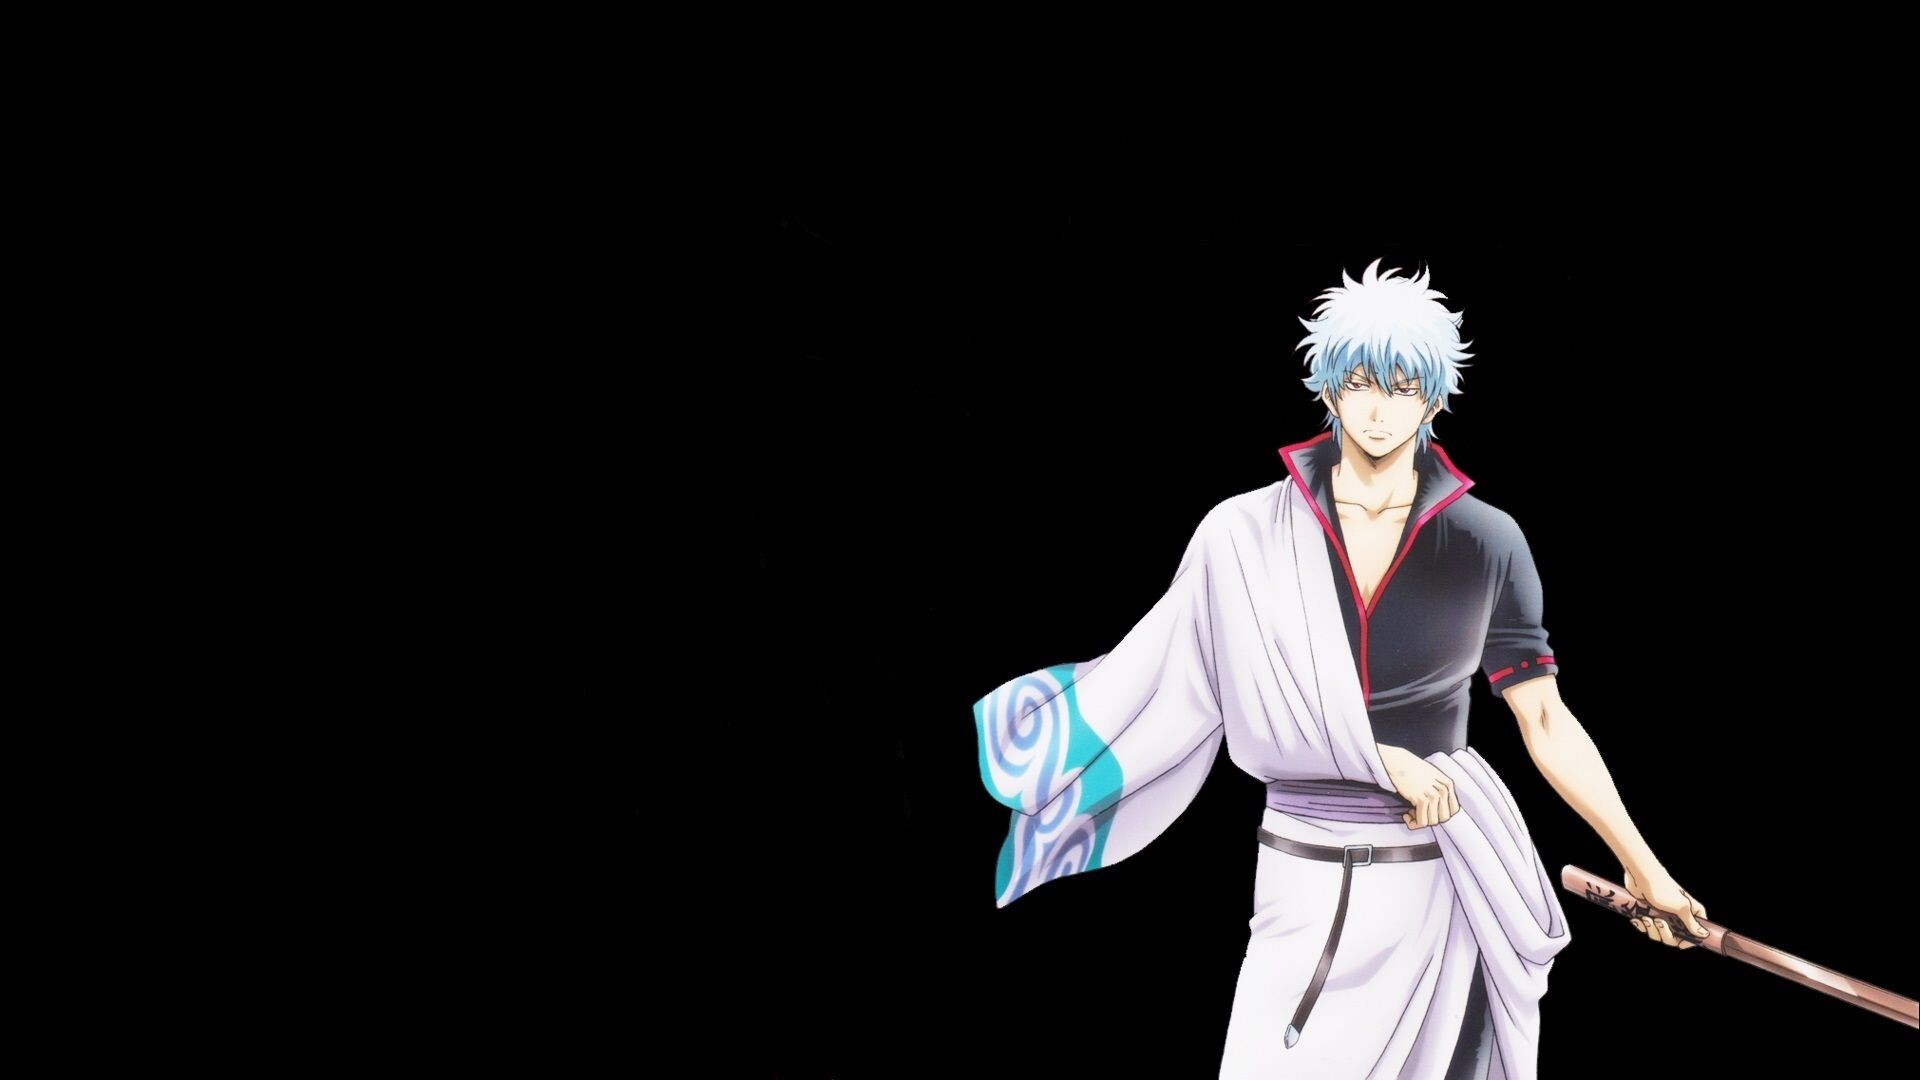 Gintama (TV Series): A highly-skilled ninja, specializing in the usage of kunai, The nickname: White demon. 1920x1080 Full HD Background.